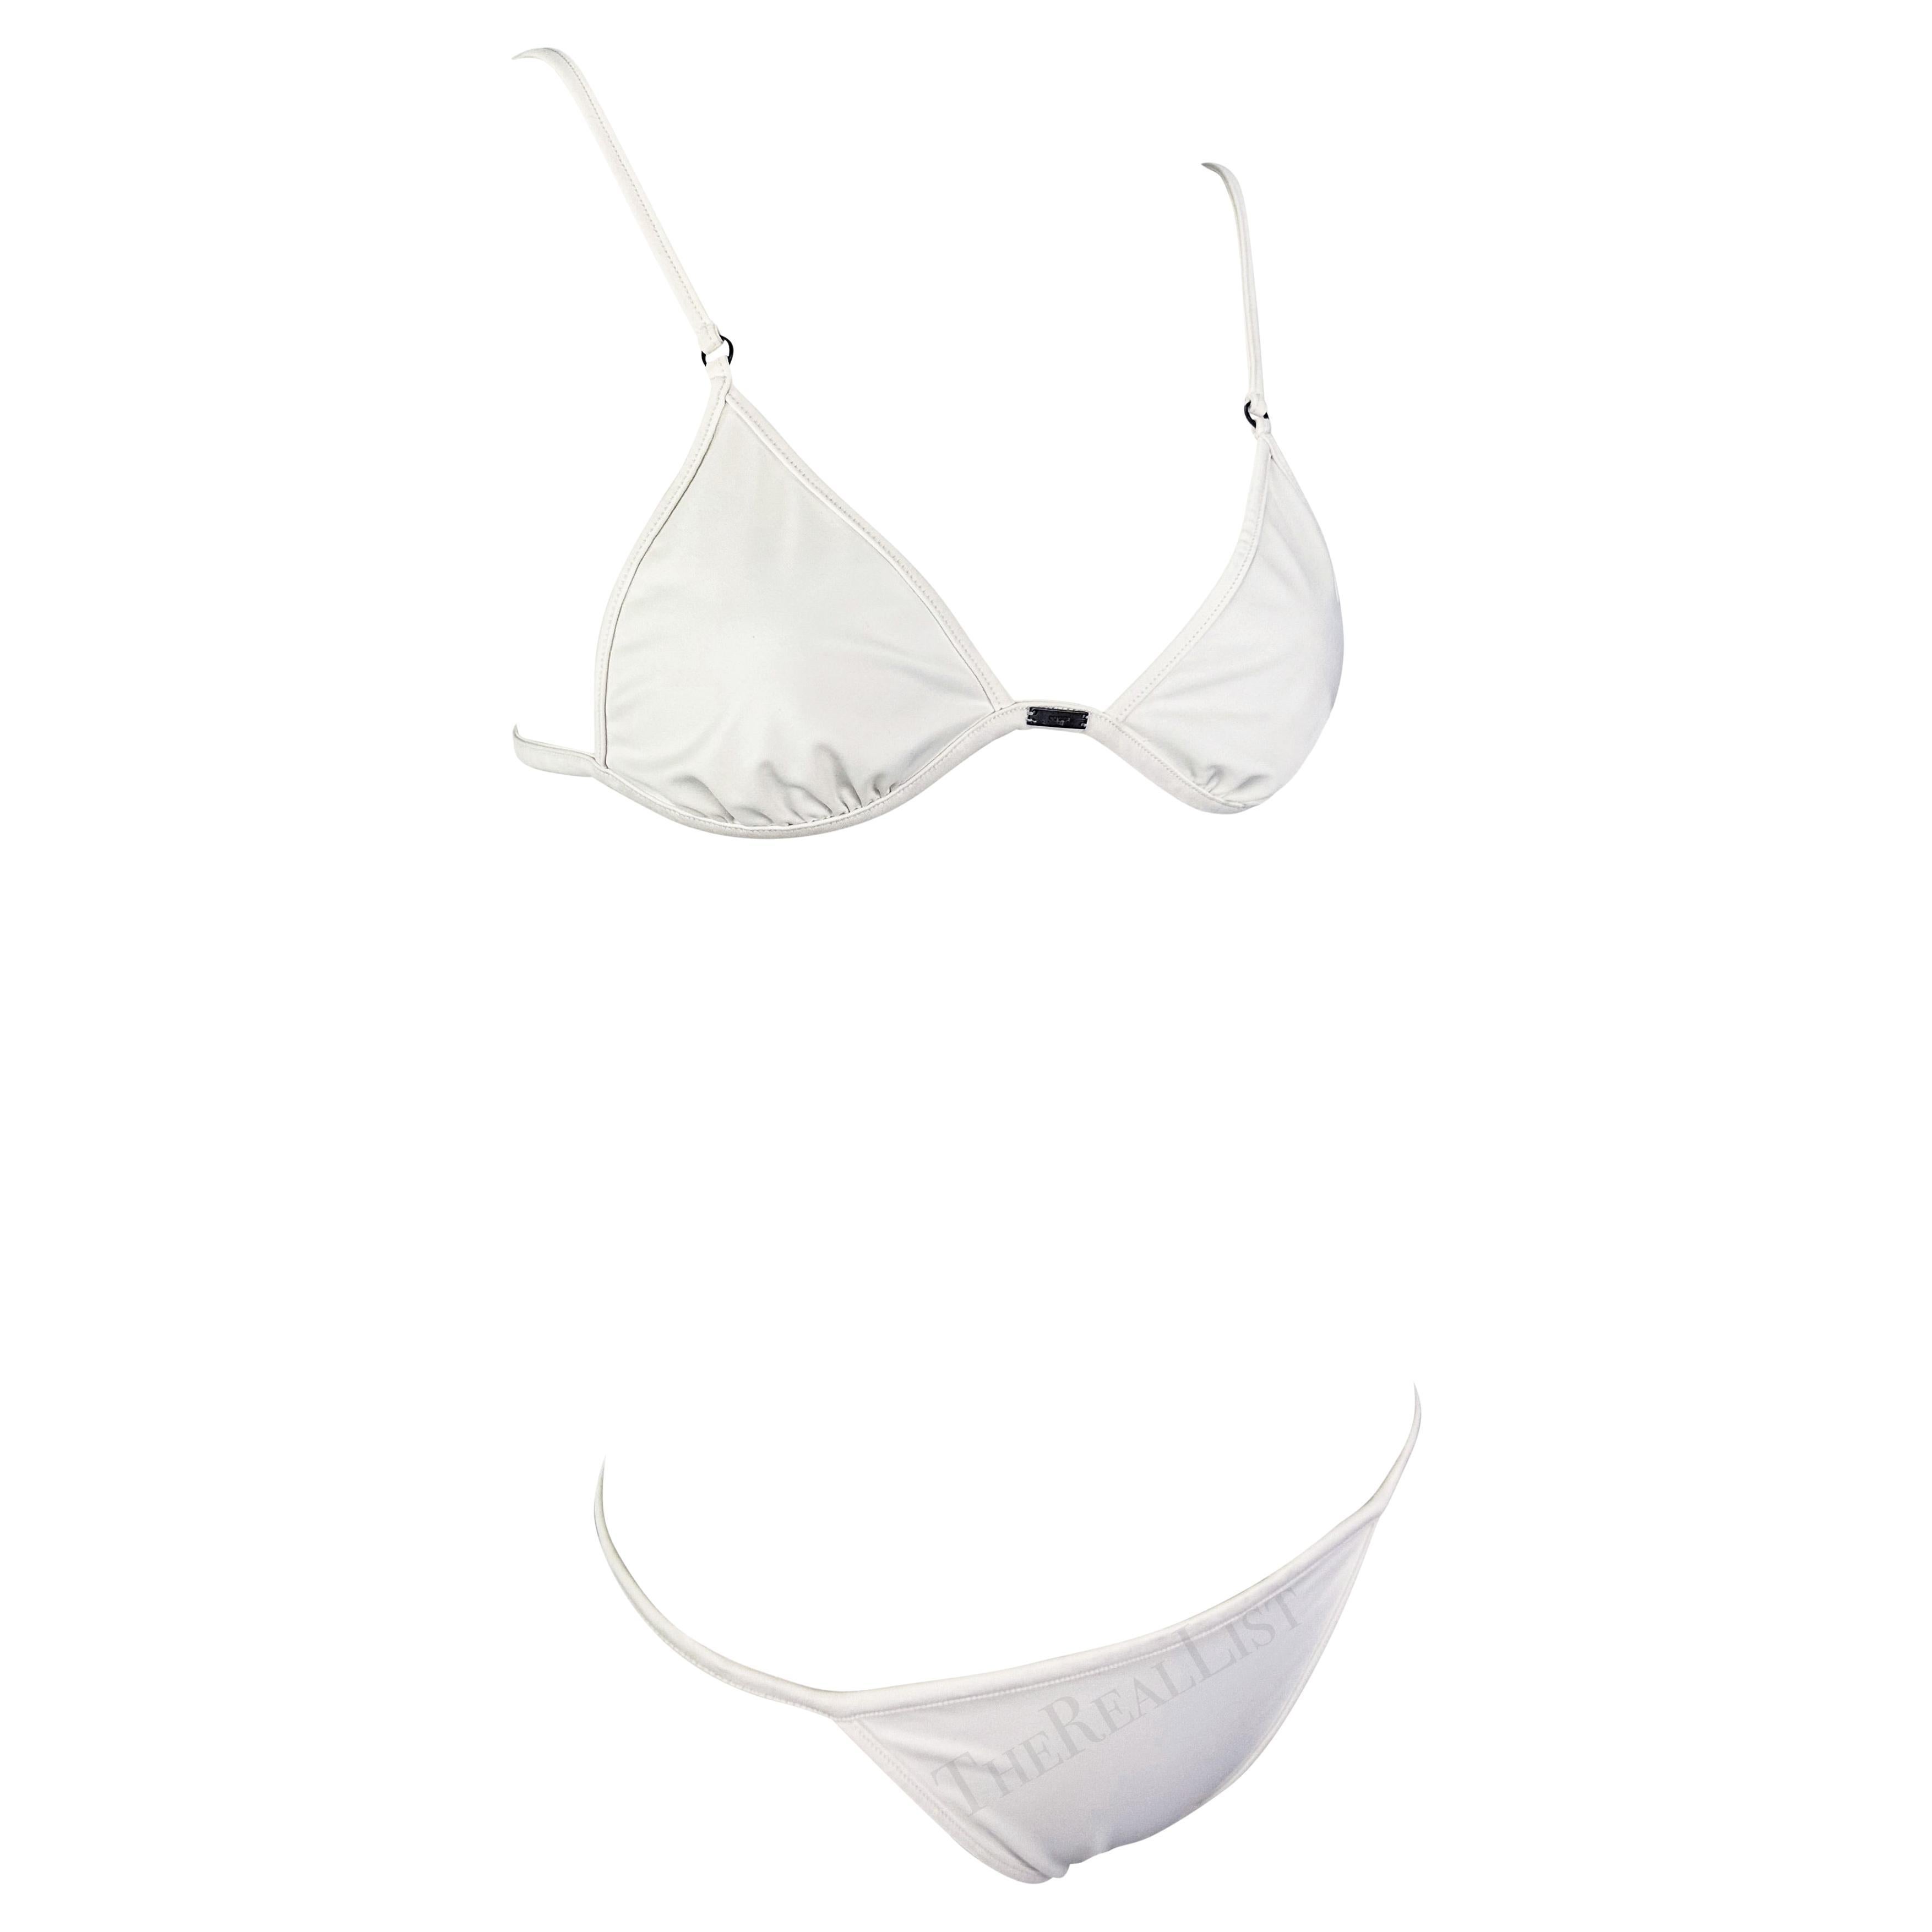 S/S 2001 Gucci by Tom Ford White Bikini Two-Piece Swimsuit Set For Sale